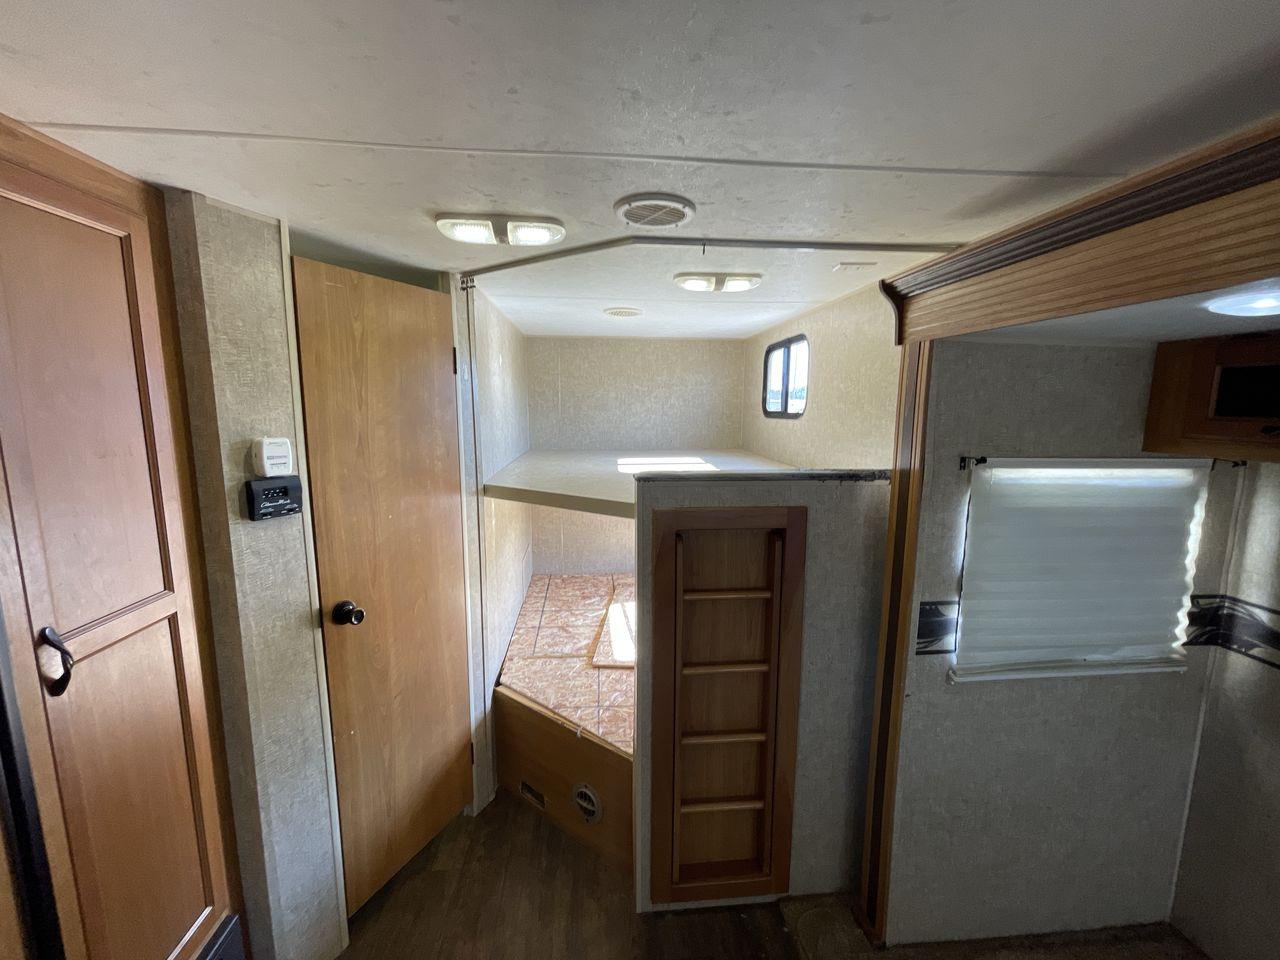 2014 BEIGE KZRV SPREE 282BHS (4EZTL2826E8) , Length: 31.33 ft. | Dry Weight: 5,610 lbs. | Gross Weight: 6,800 lbs. | Slides: 1 transmission, located at 4319 N Main Street, Cleburne, TX, 76033, (817) 221-0660, 32.435829, -97.384178 - Take the 2014 KZ RV Spree 282BHS Travel Trailer on your next vacation. Comfort, style, and functionality are all combined in this well-designed travel trailer, which makes it a great option for families or groups looking for a dependable and roomy mobile home. This trailer measures 31.33 ft in le - Photo #19